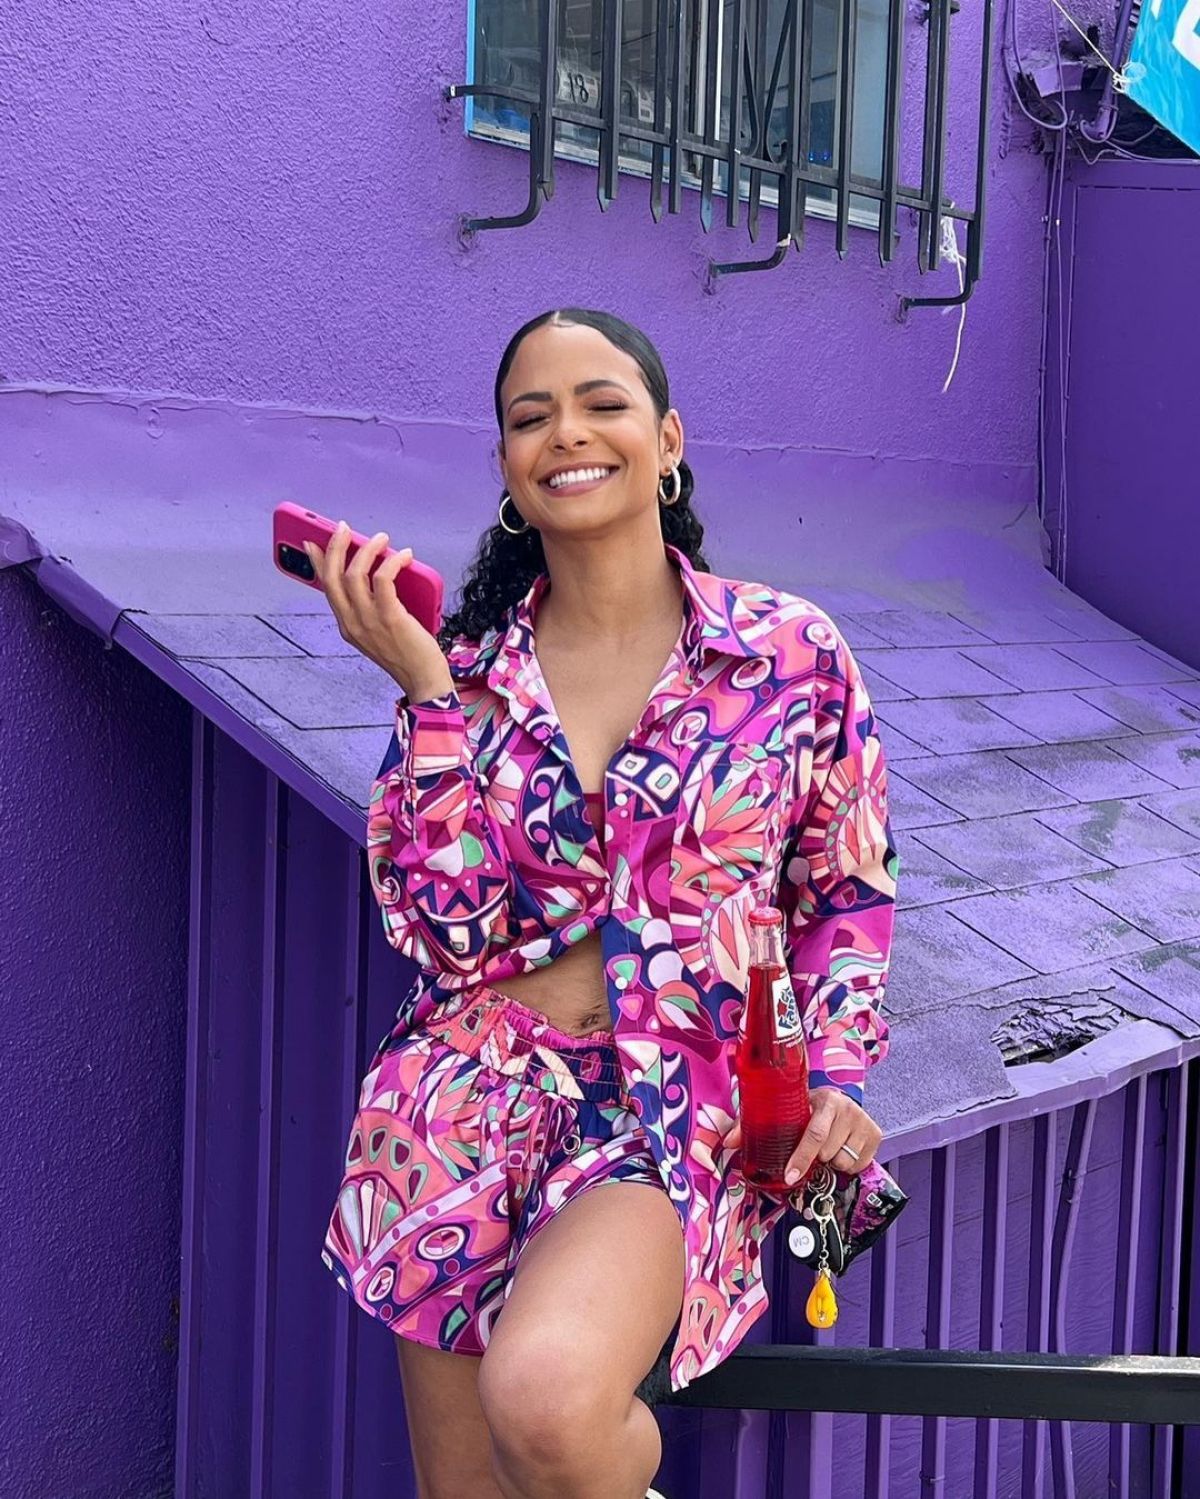 Christina Milian's Instagram Photos: Effortlessly Stylish in Floral Dress and FashionNova Outfit